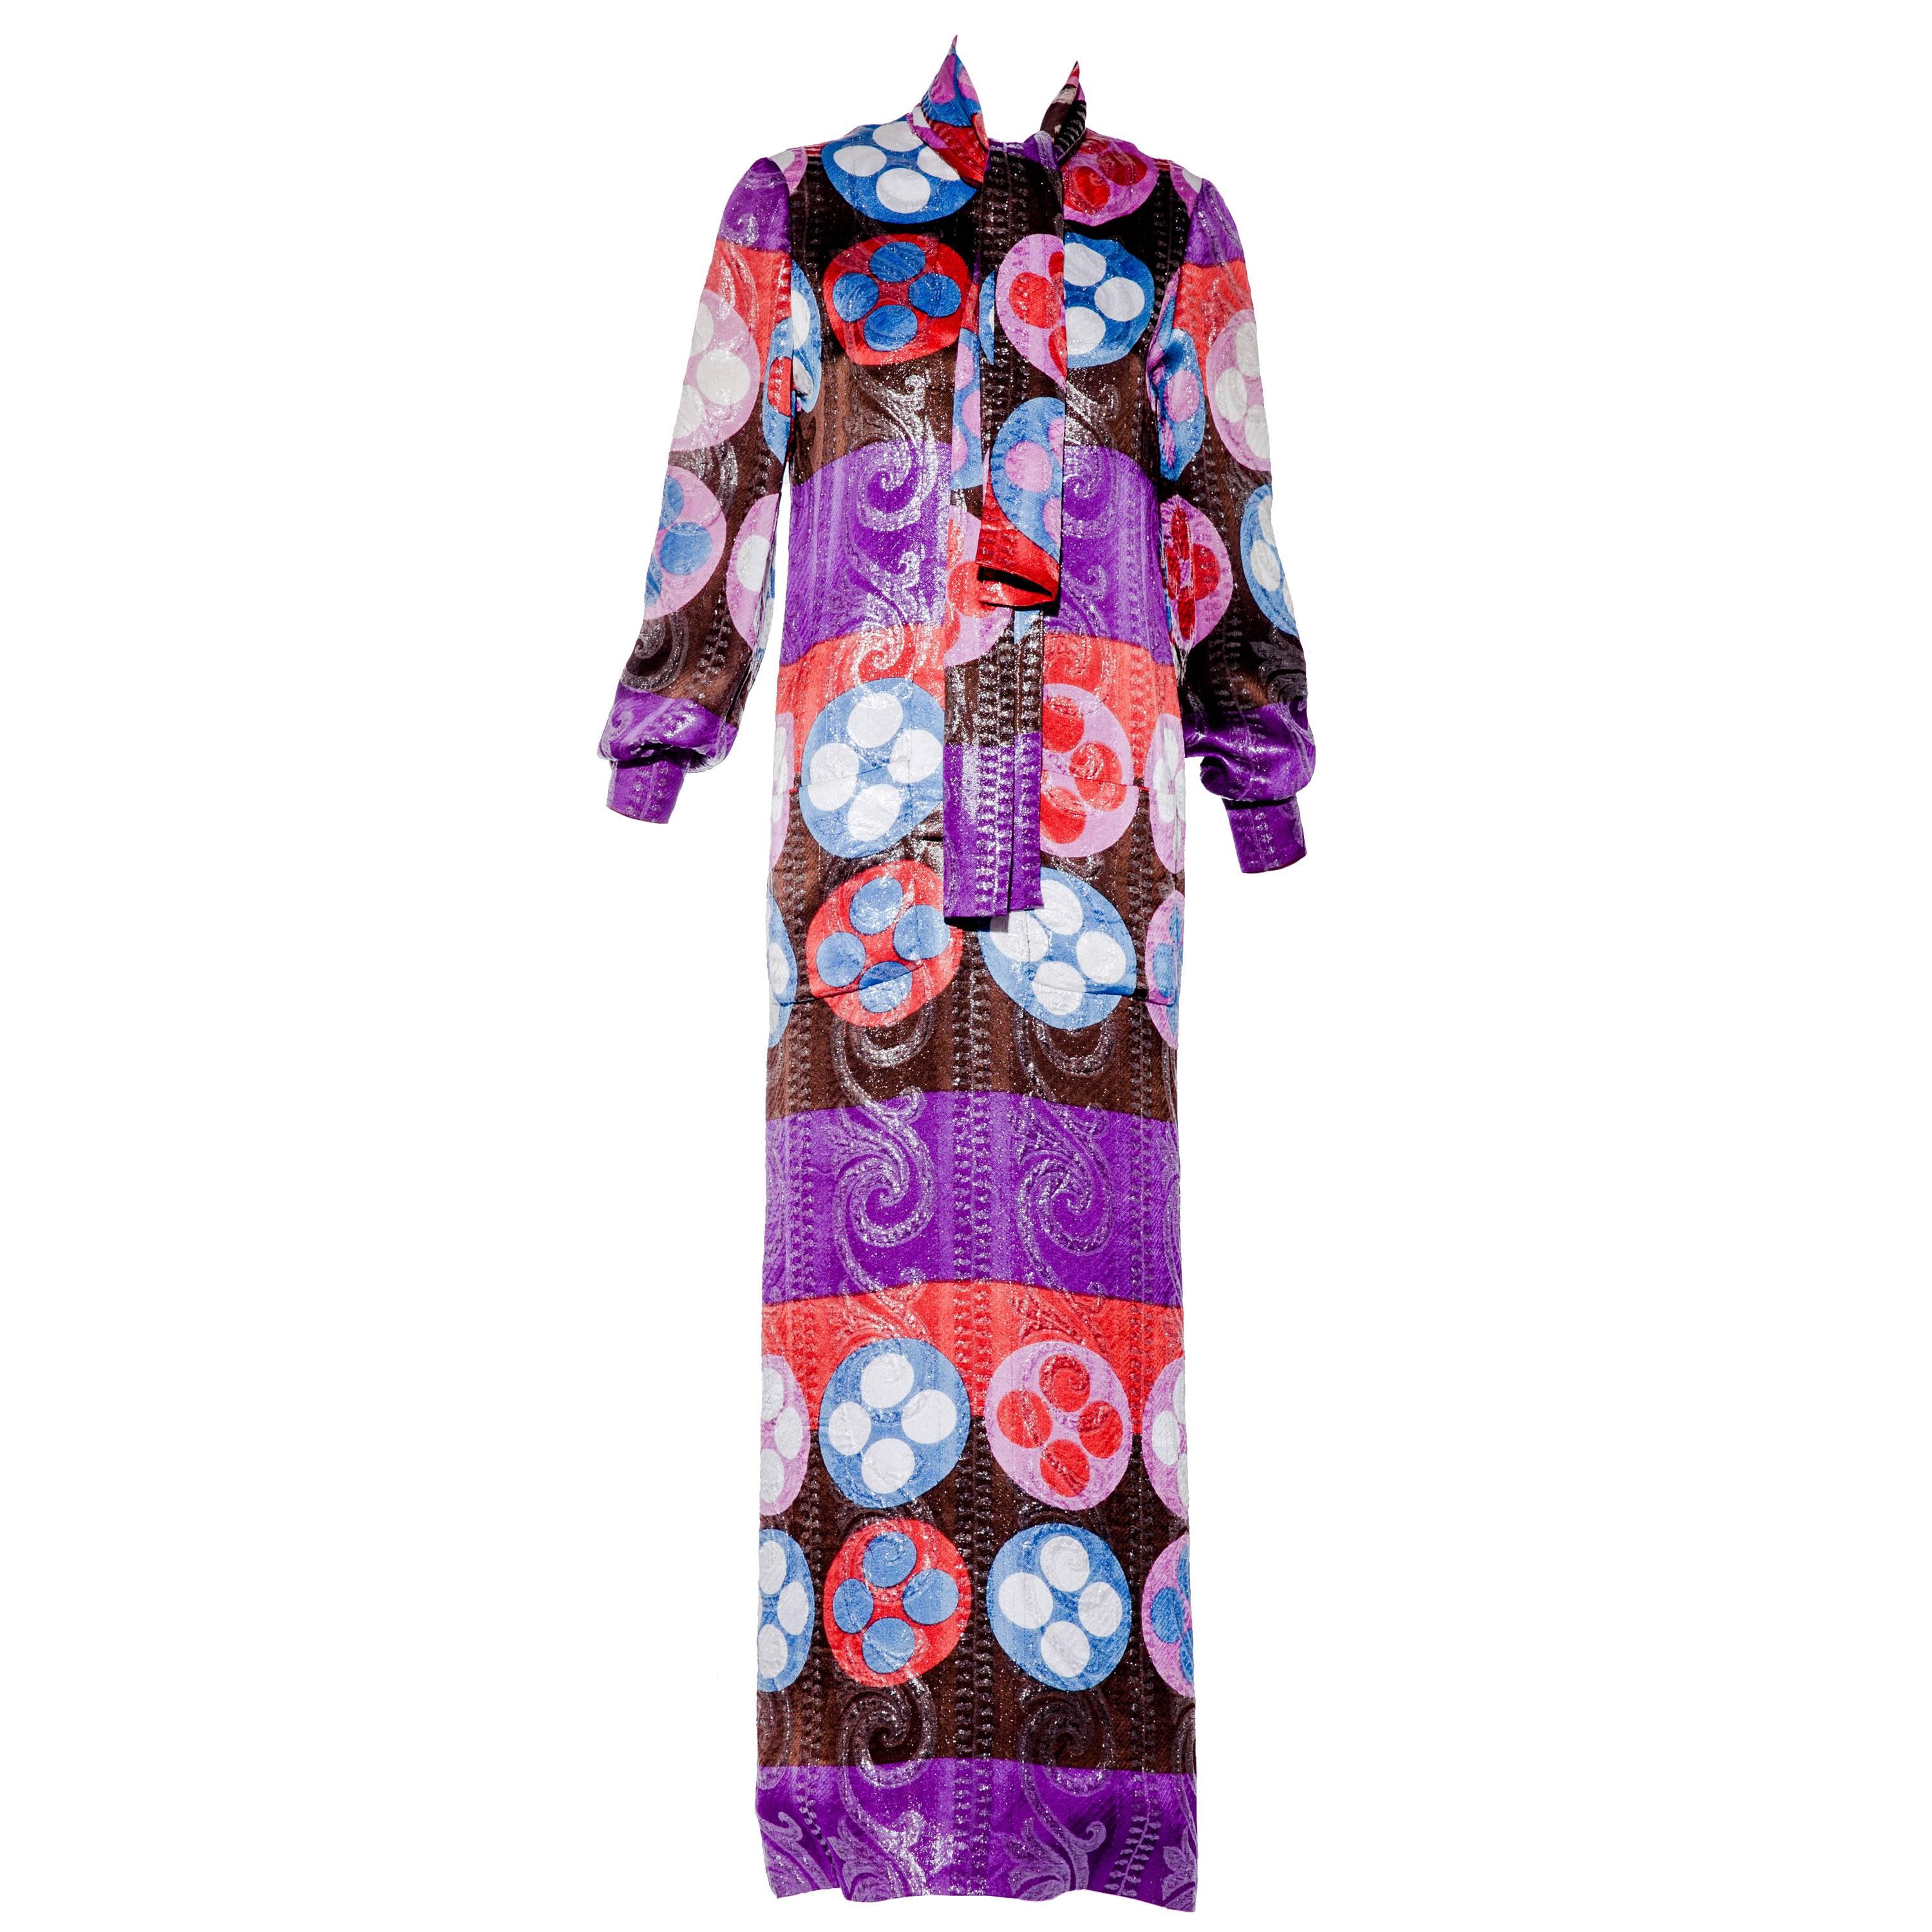 Lanvin silk dress with attached scarf in geometric print, 1970s at 1stDibs